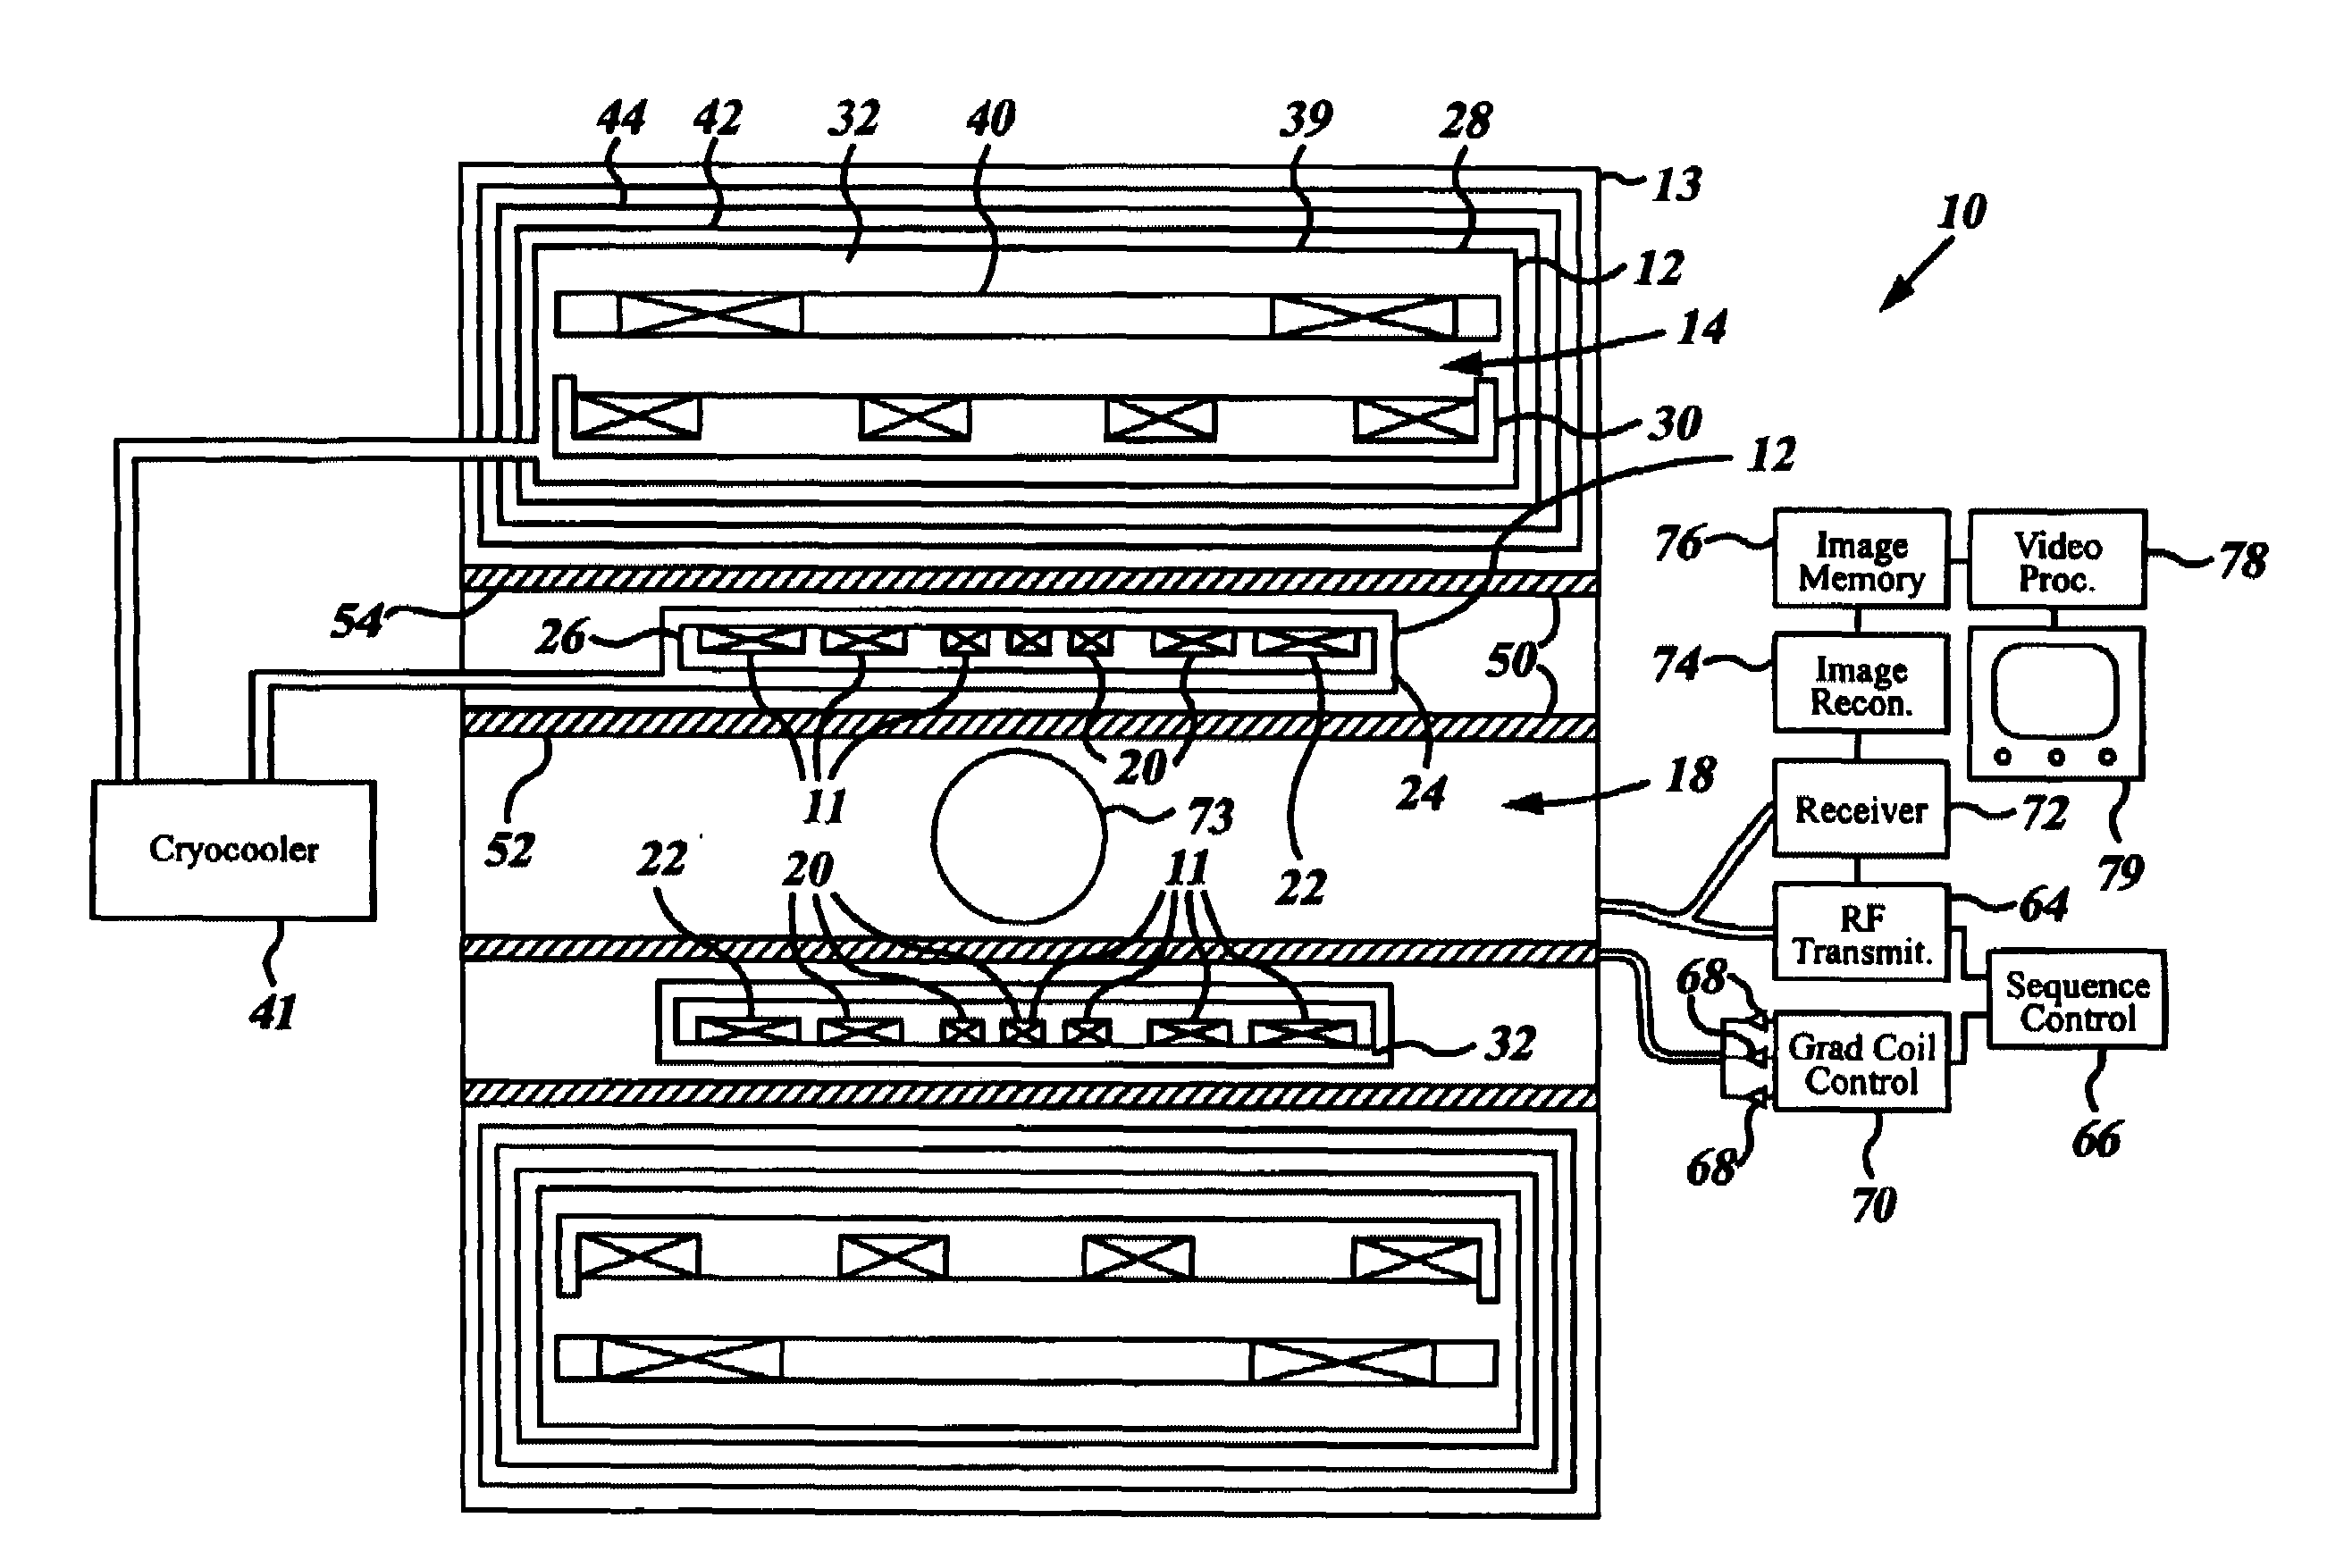 MRI system utilizing supplemental static field-shaping coils